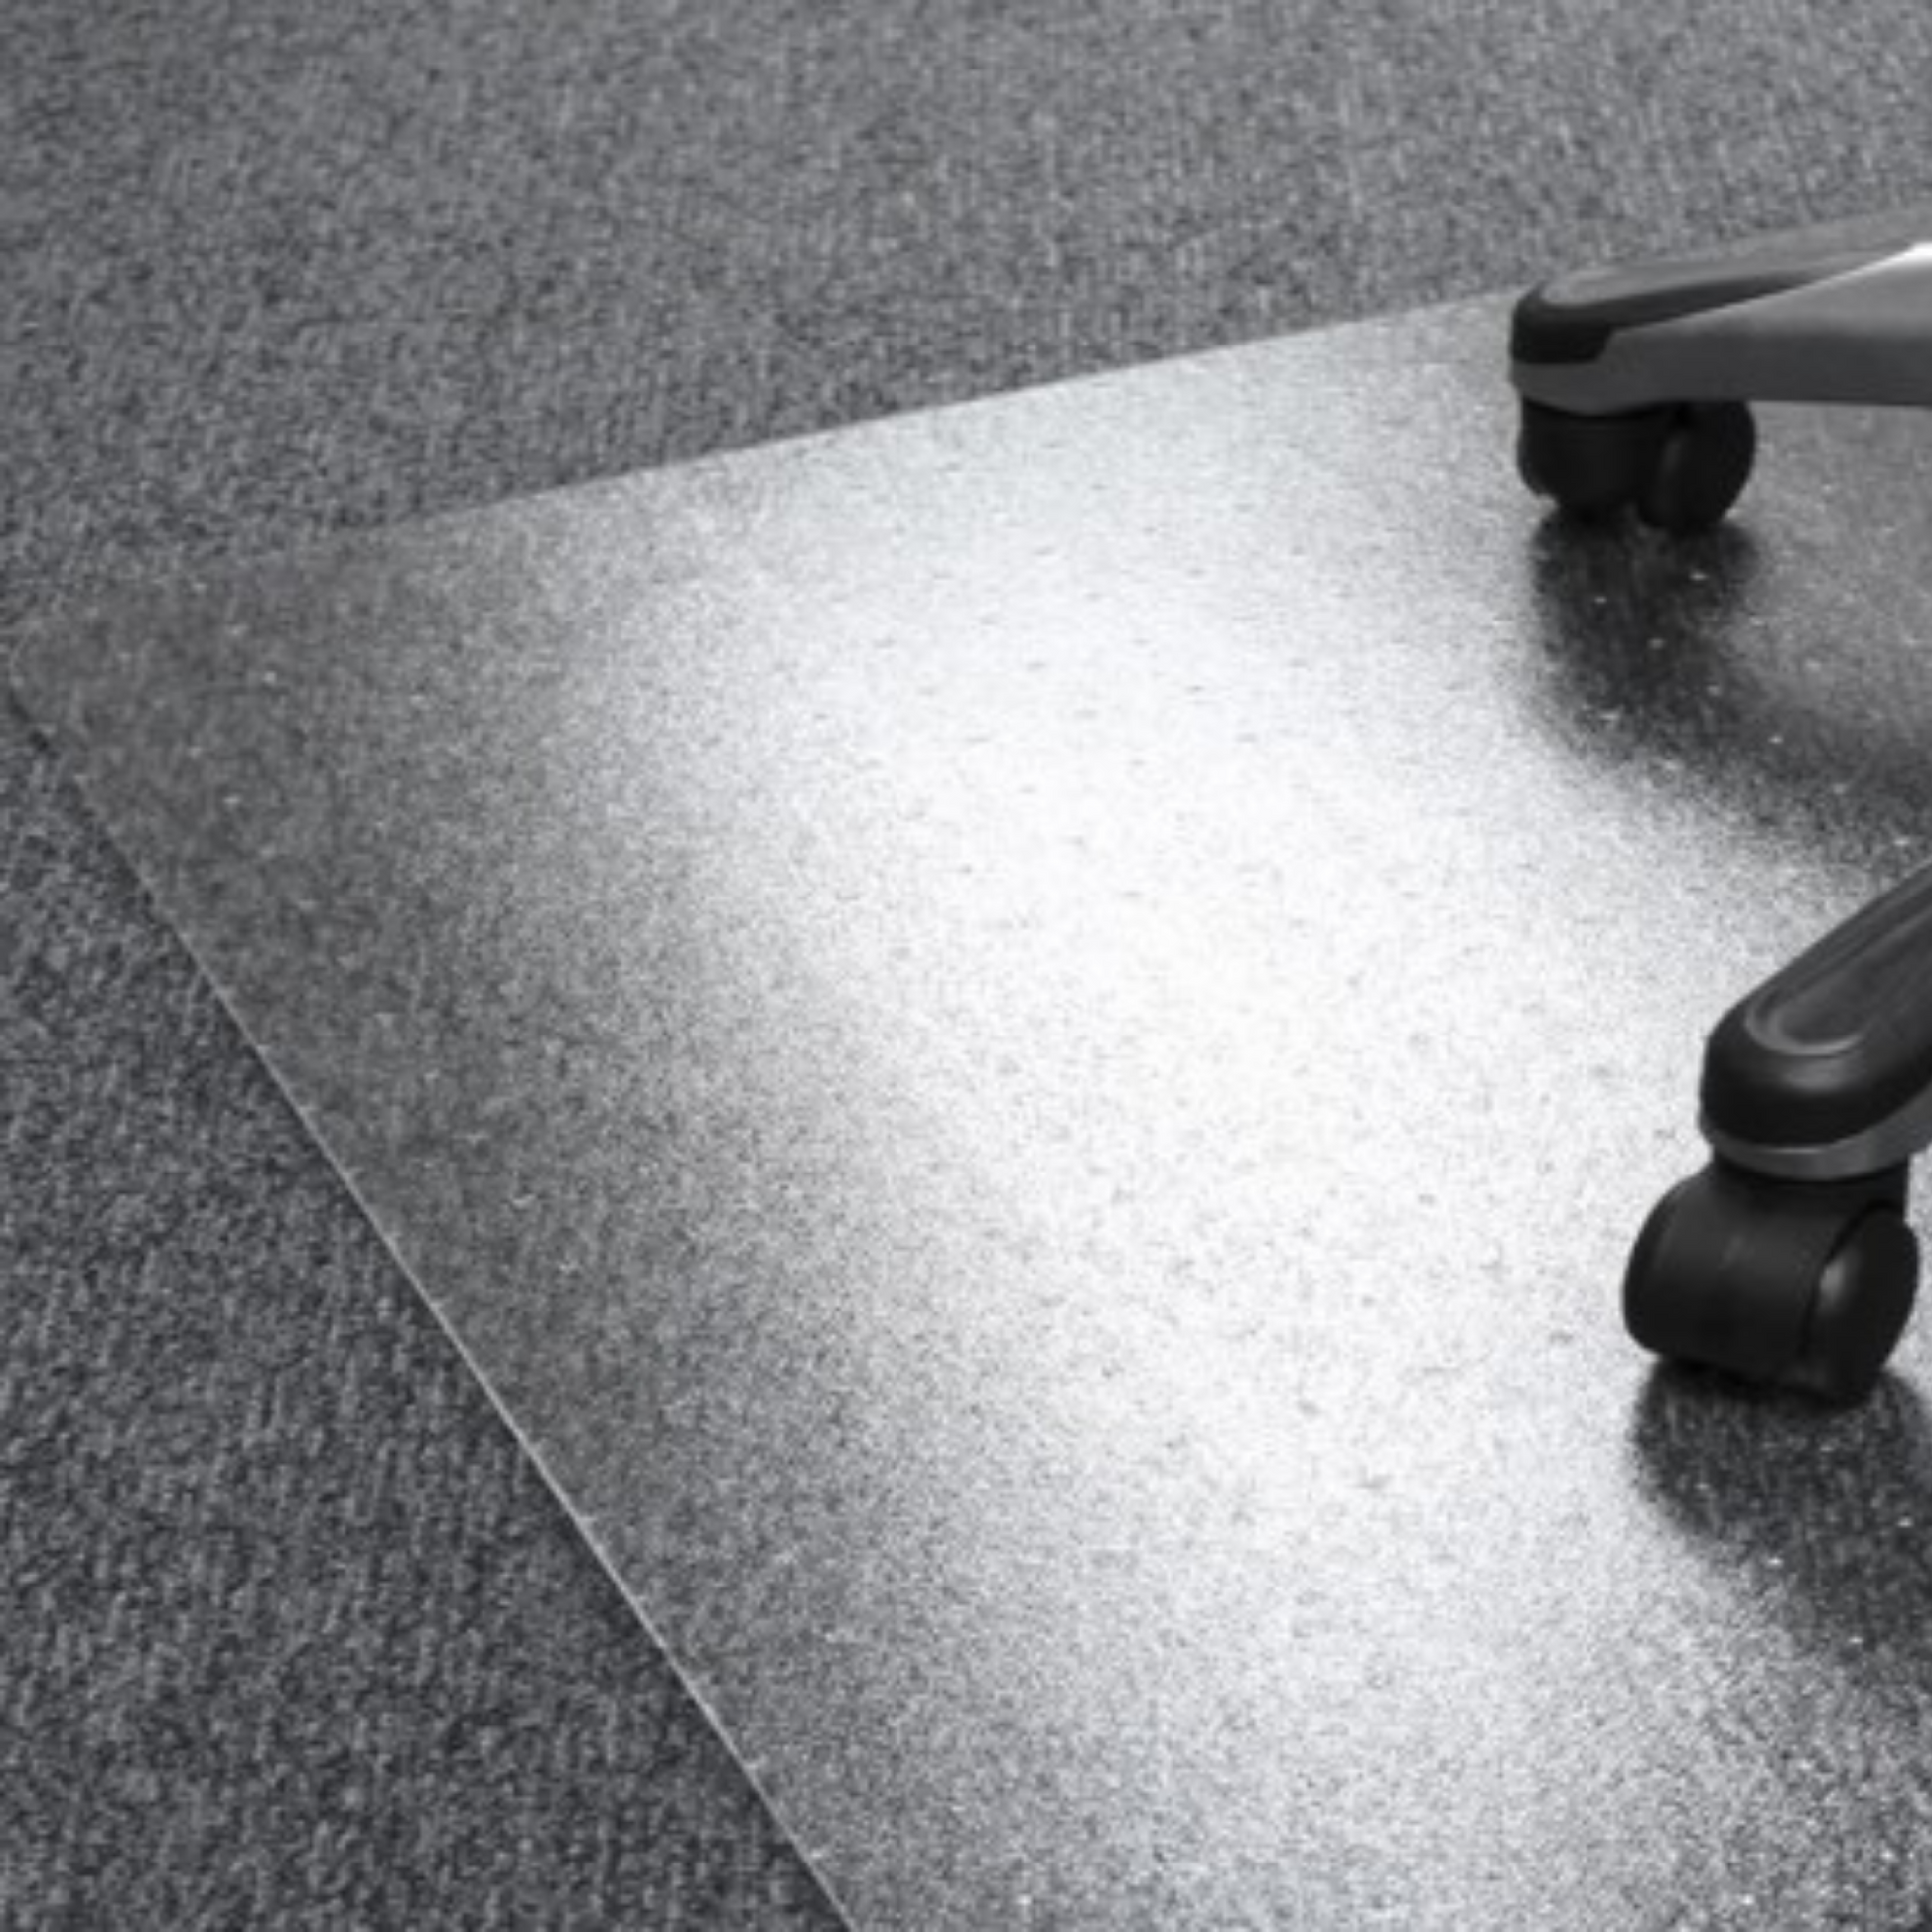 A translucent PVC floor mat designed for low pile carpets, sized 90x120cm, is partially visible under the wheels of an office chair, offering floor protection and chair mobility on carpeted surfaces.